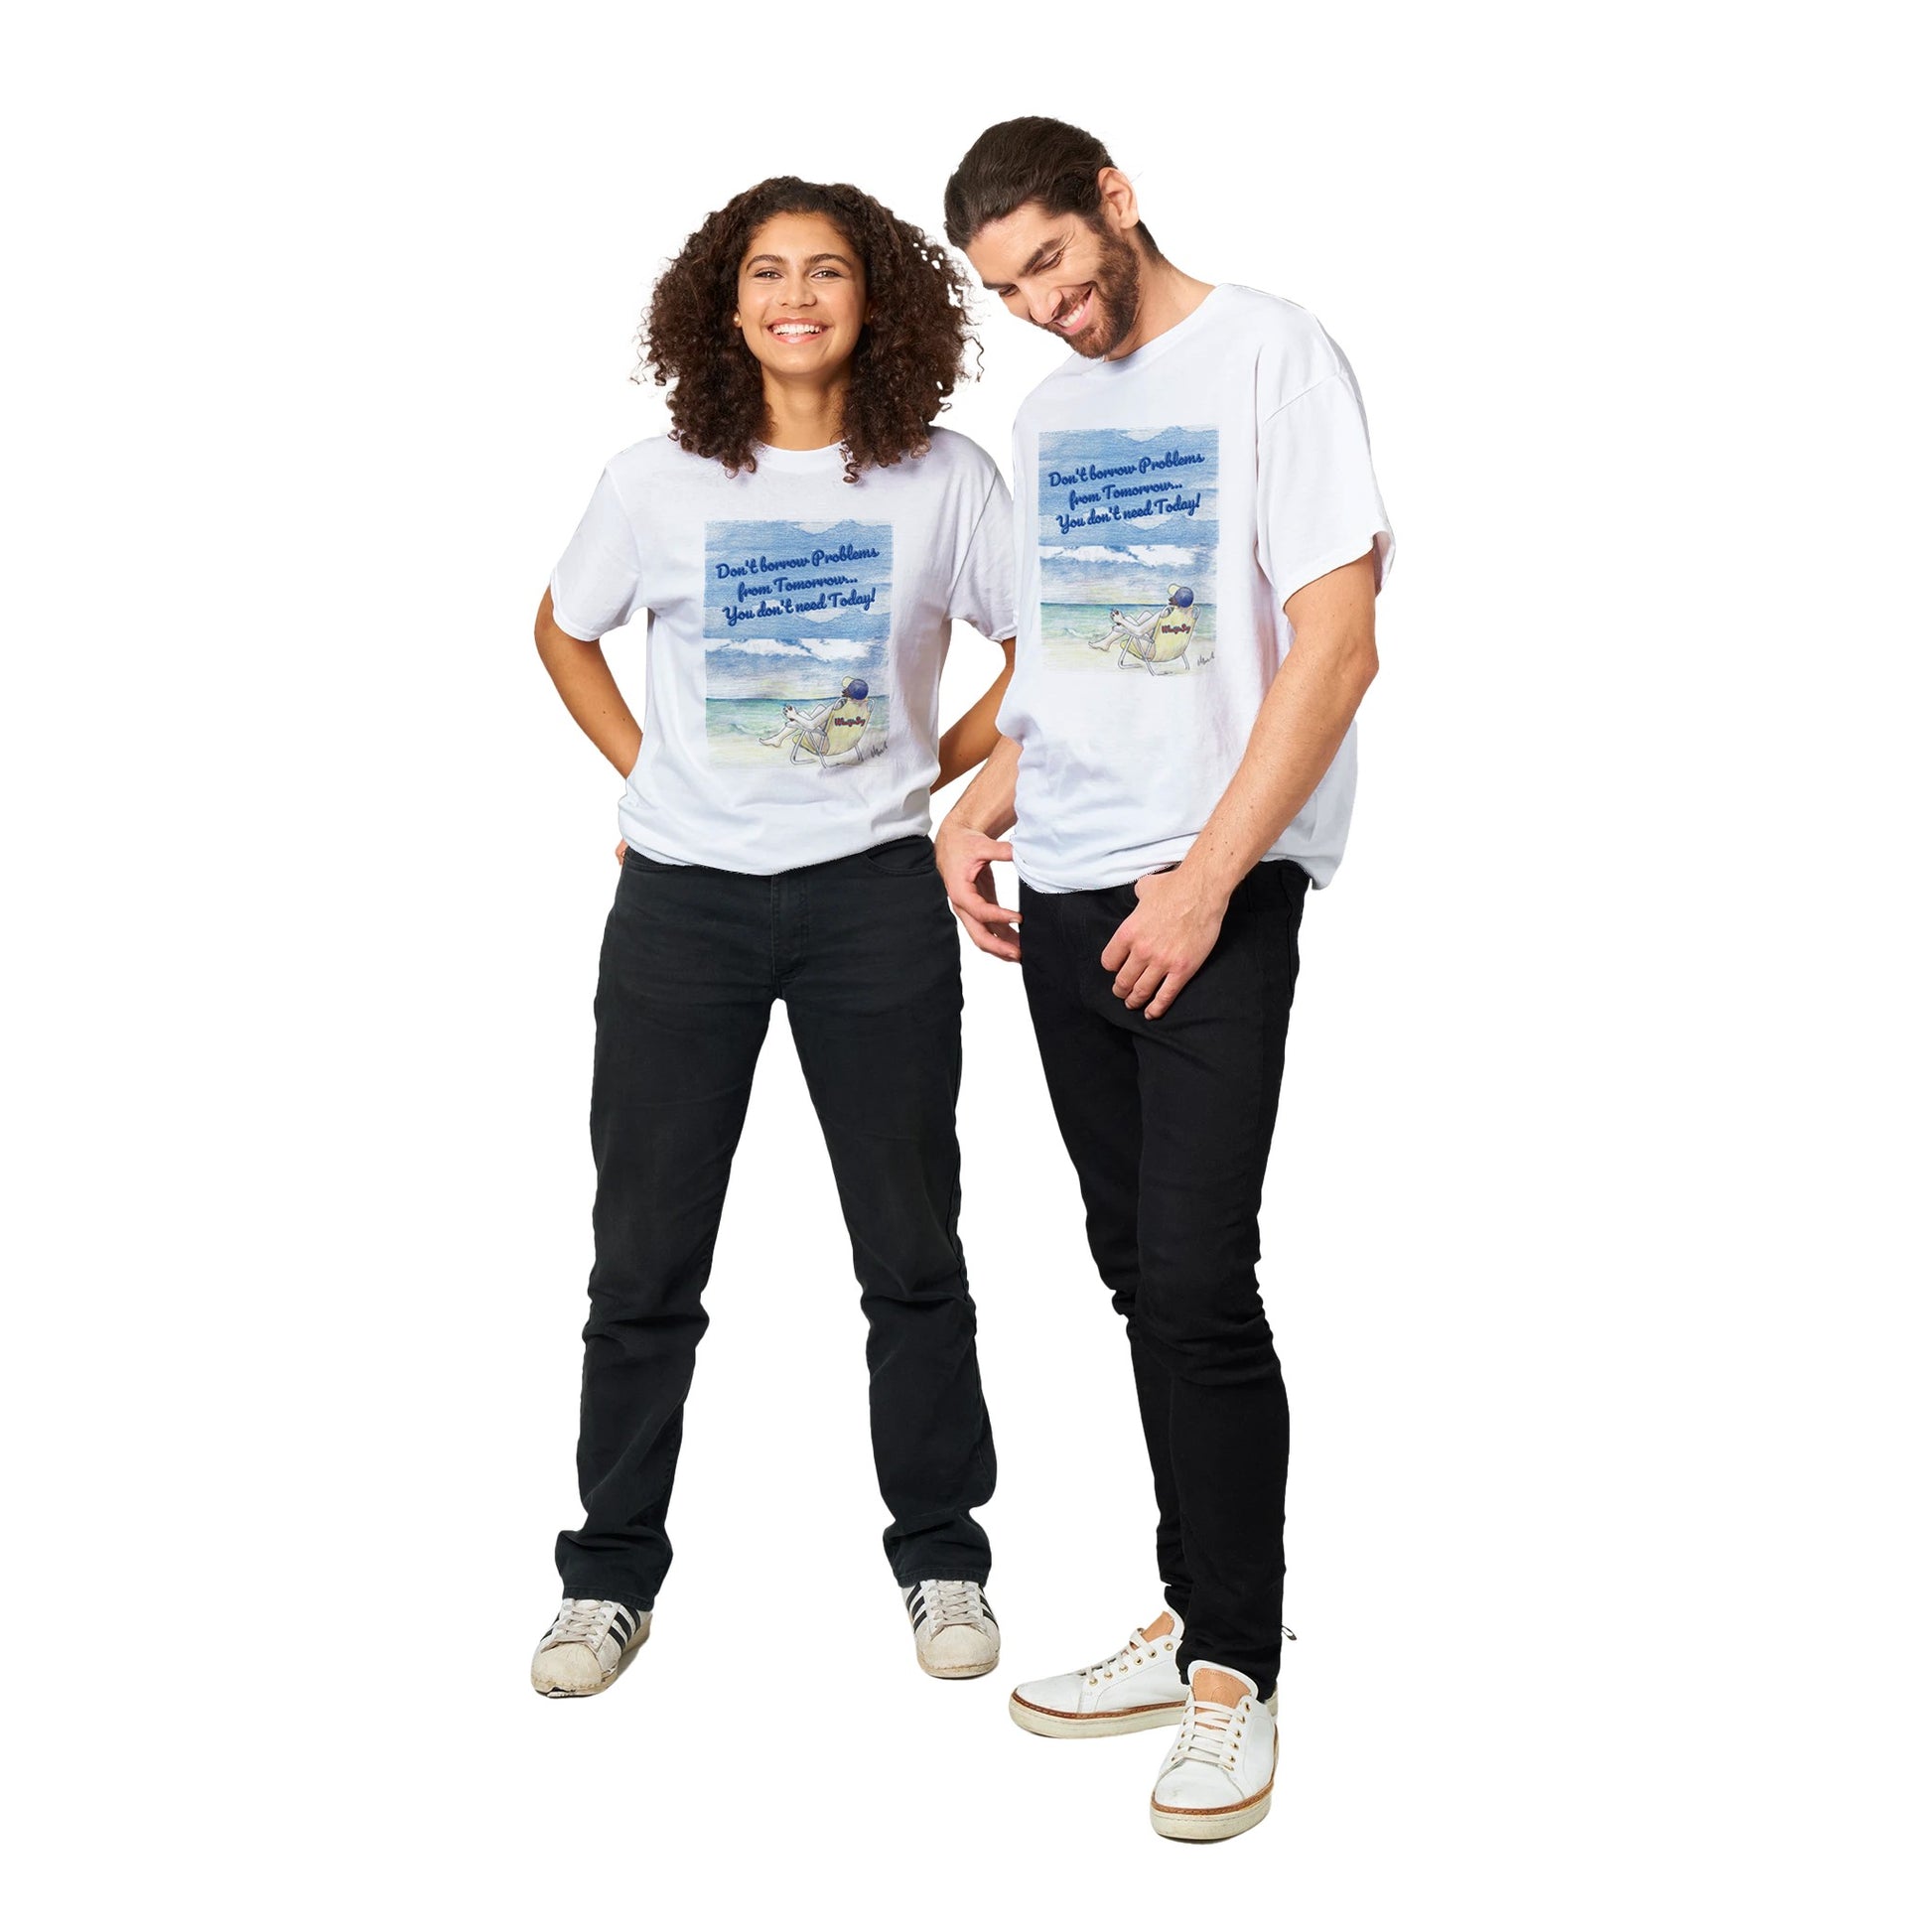 A white heavyweight Unisex Crewneck t-shirt with original artwork and motto Don’t borrow Problems from Tomorrow… You don’t need Today! on front with WhatYa Say logo on image  from WhatYa Say Apparel worn by Happy woman and man couple standing side by side.